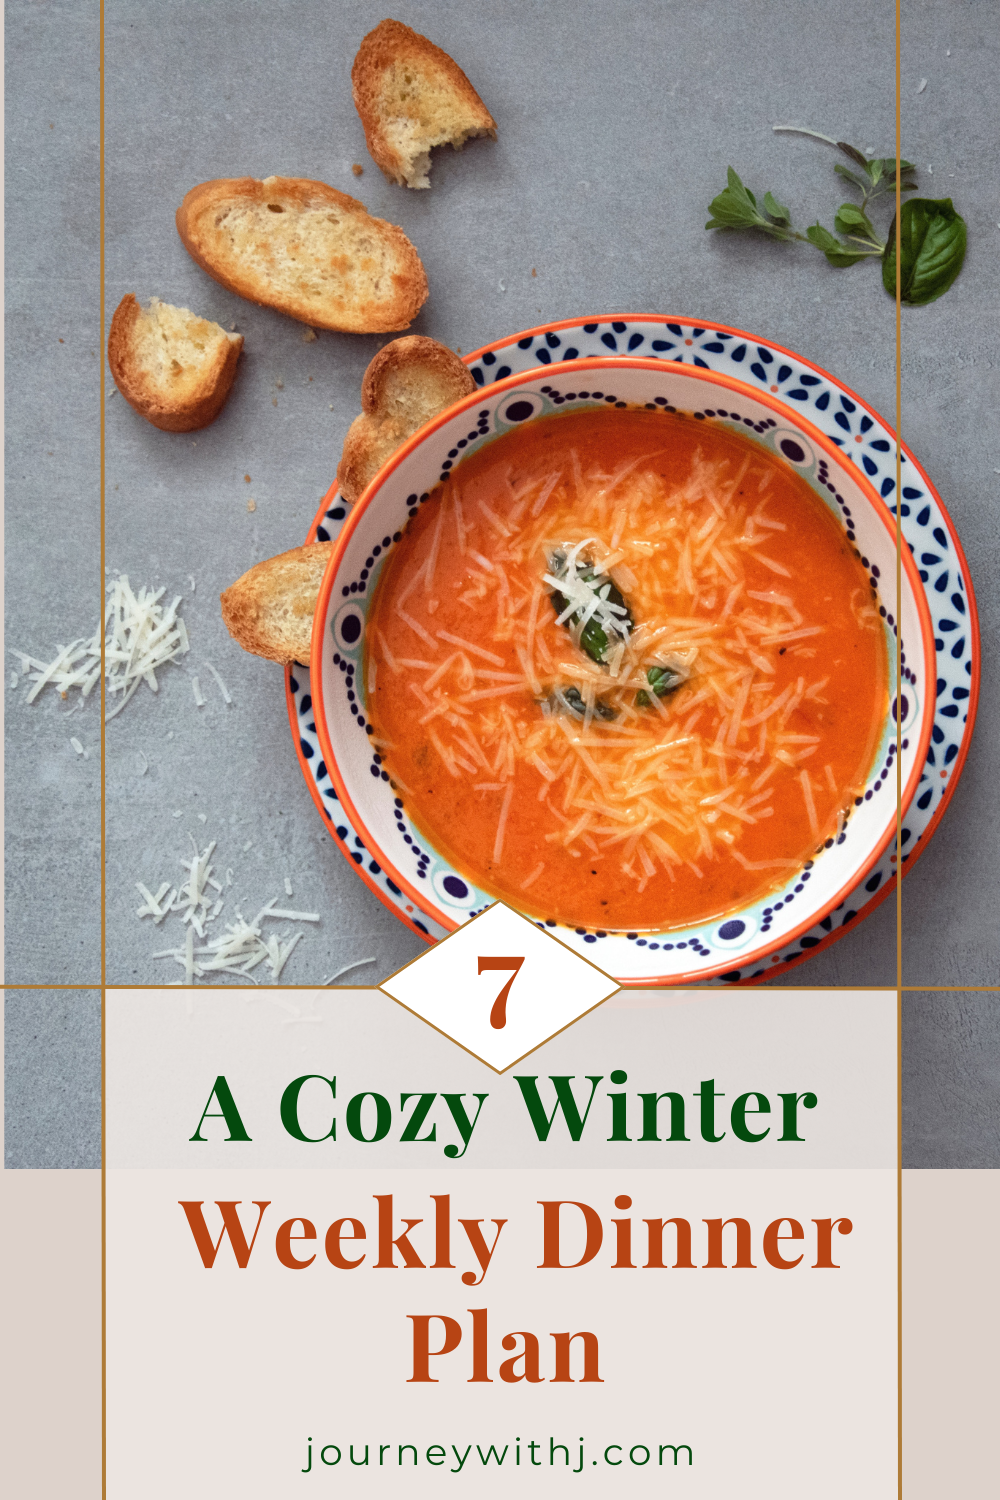 A Cozy Winter Weekly Dinner Plan